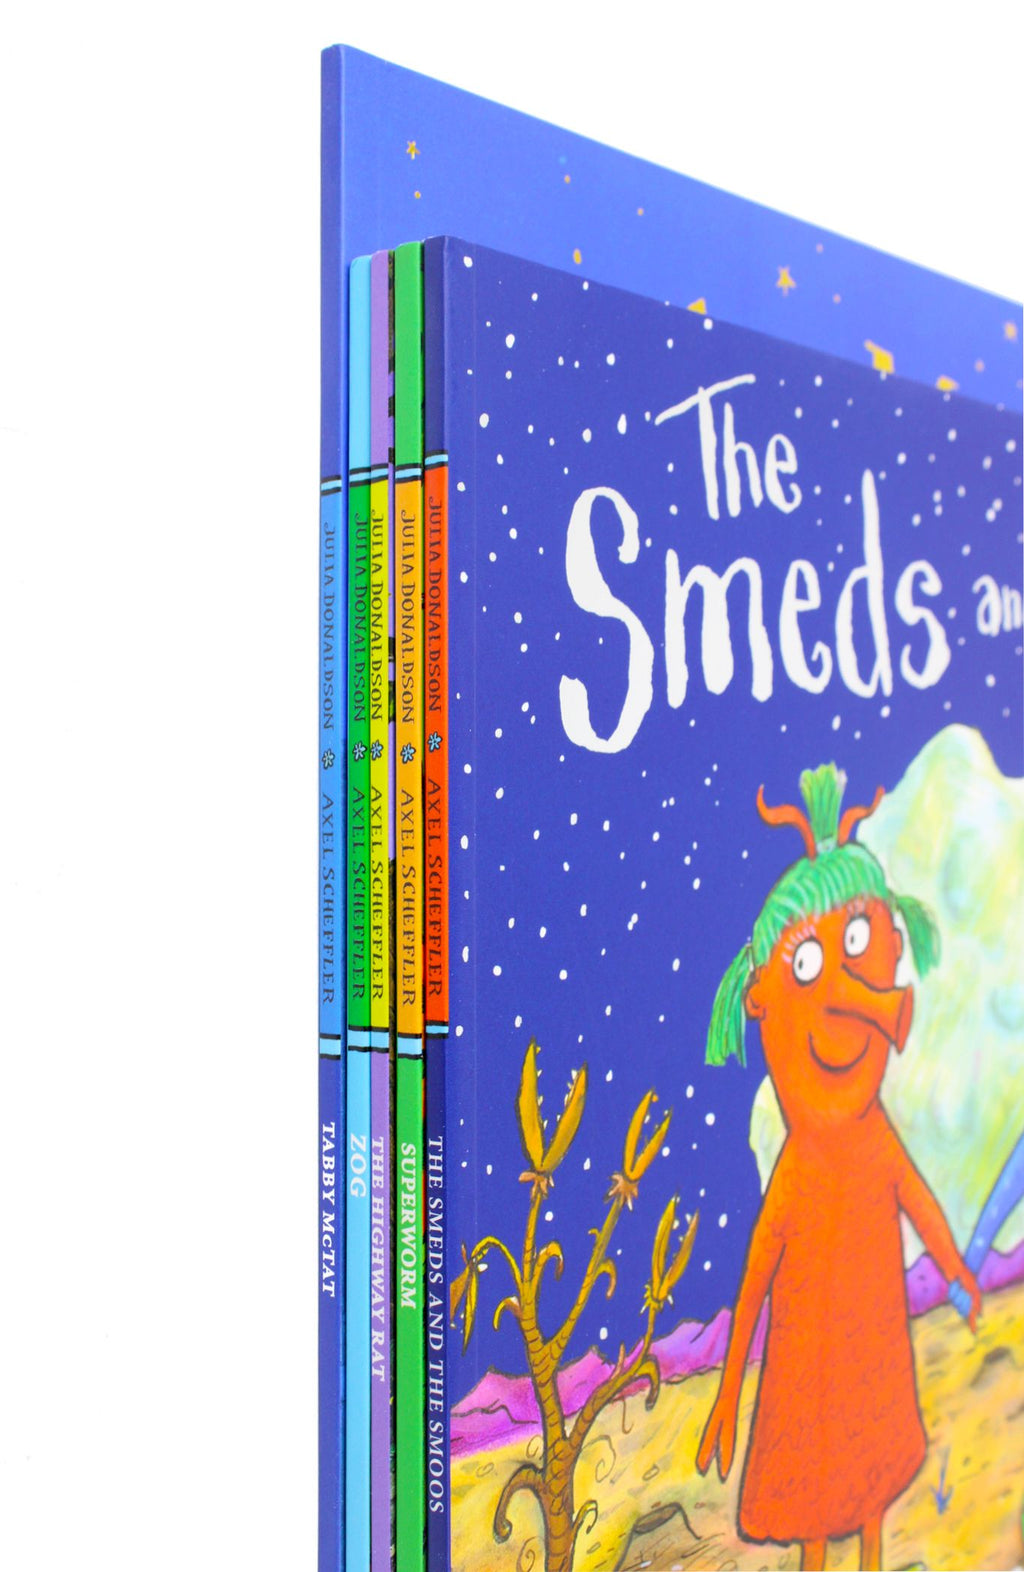 Julia Donaldson, Axel Scheffler on the 'The Smeds and The Smoos' Film